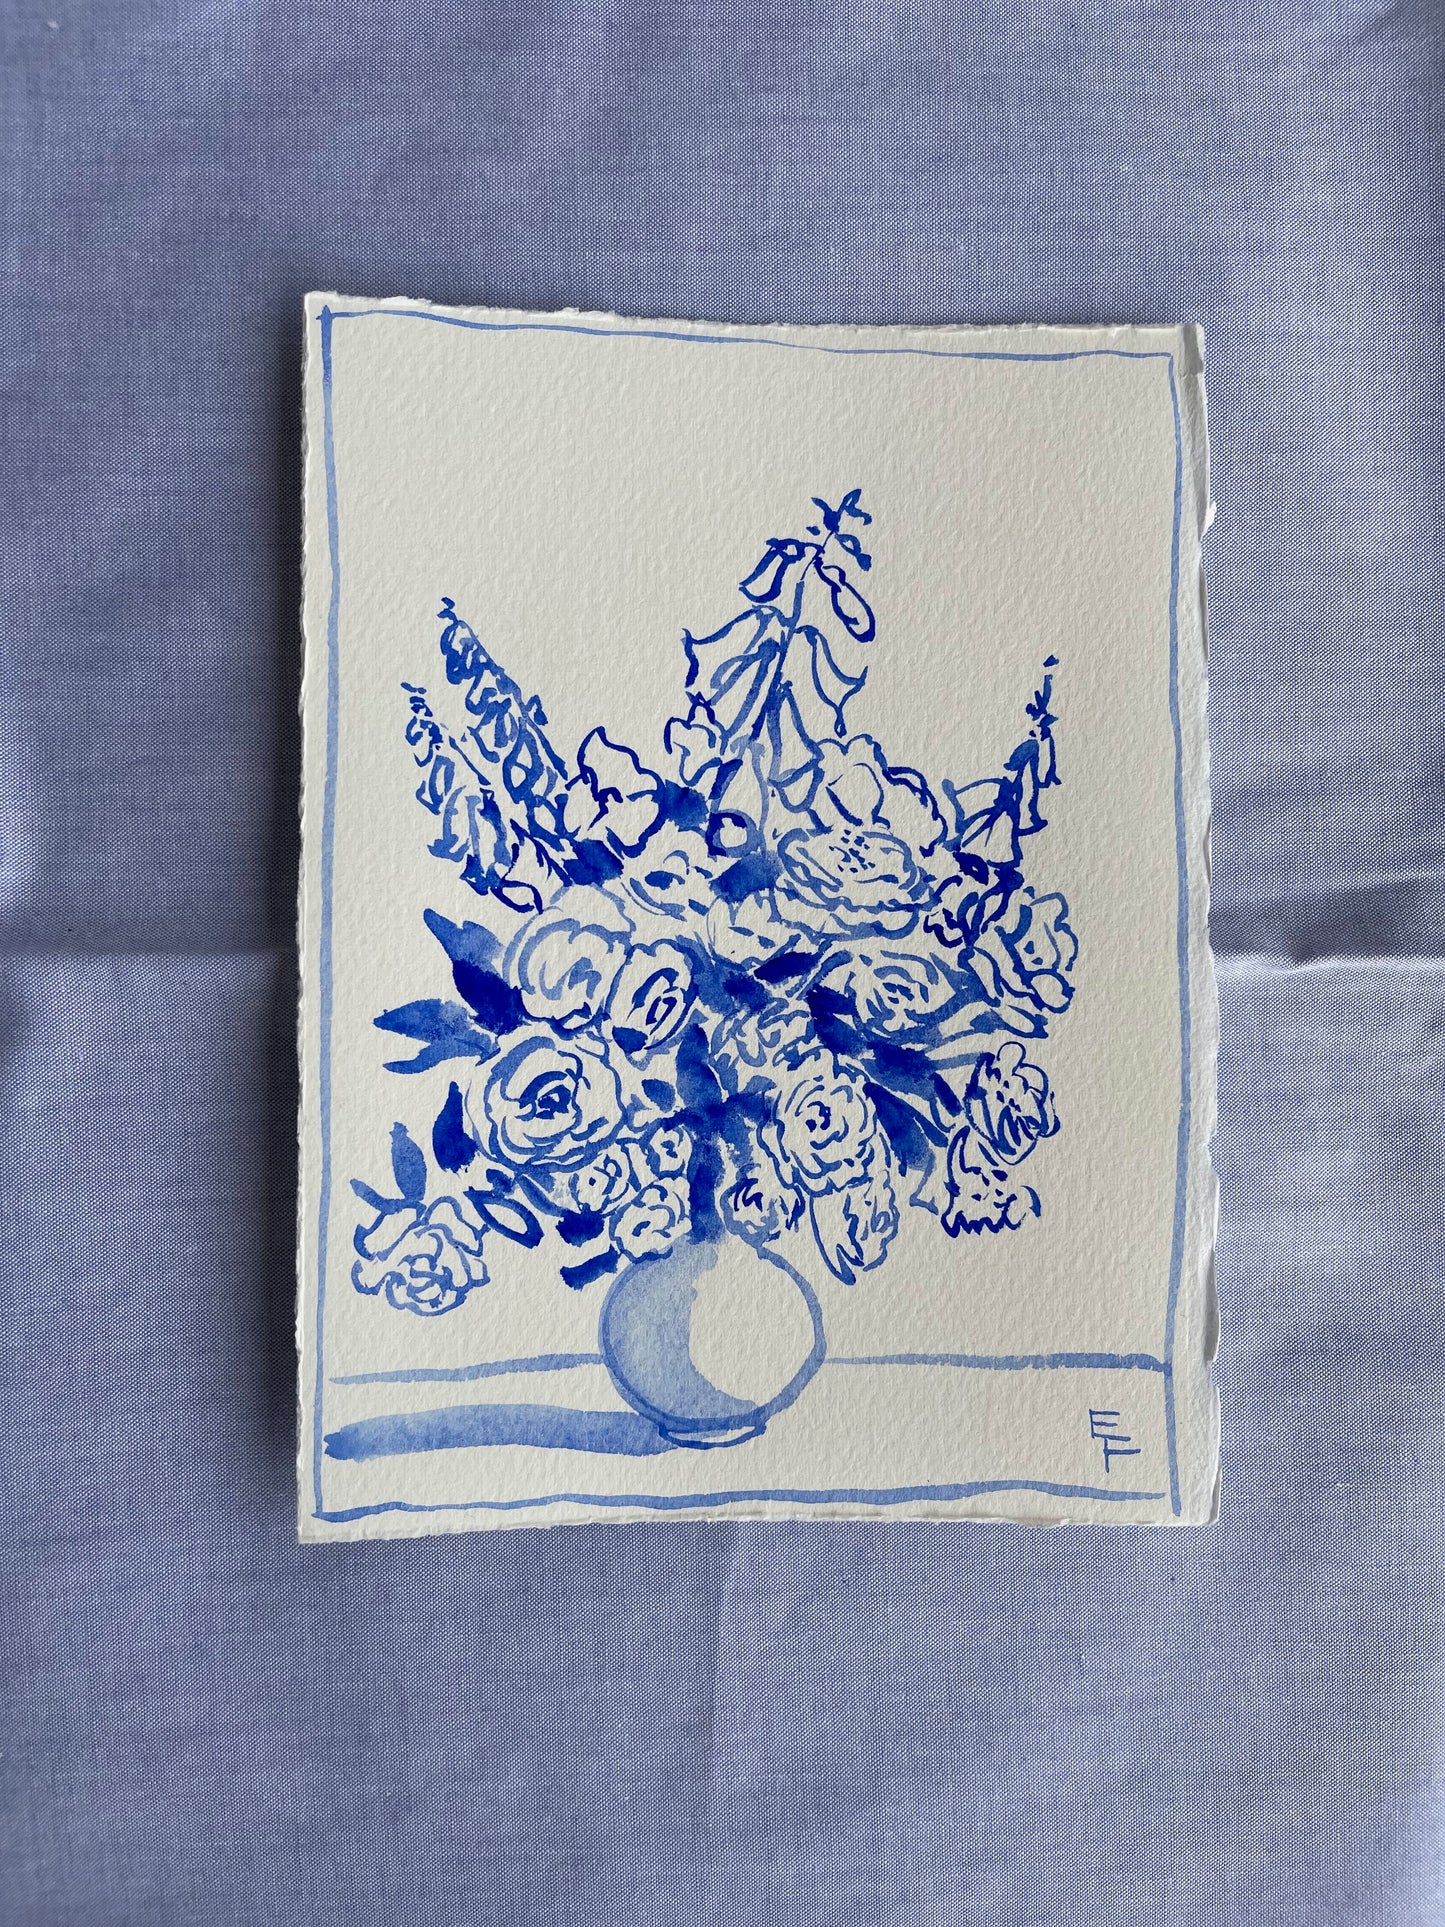 Roses and Foxglove, BLUE AND WHITE WATERCOLOR, UNFRAMED